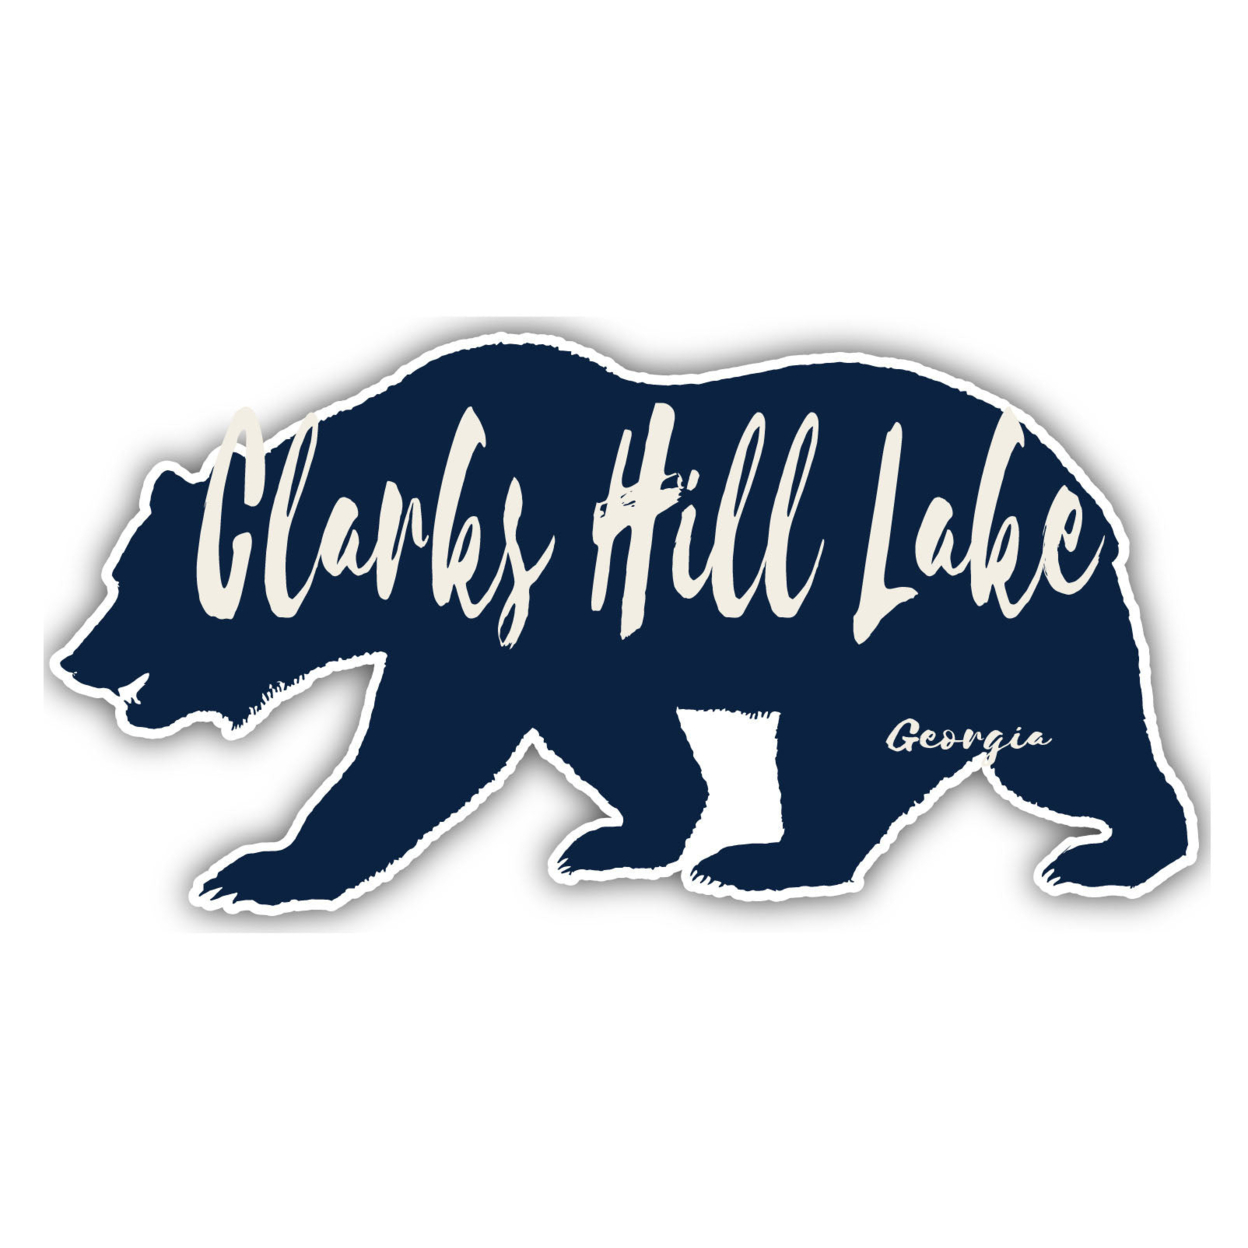 Clarks Hill Lake Georgia Souvenir Decorative Stickers (Choose Theme And Size) - 4-Pack, 10-Inch, Bear